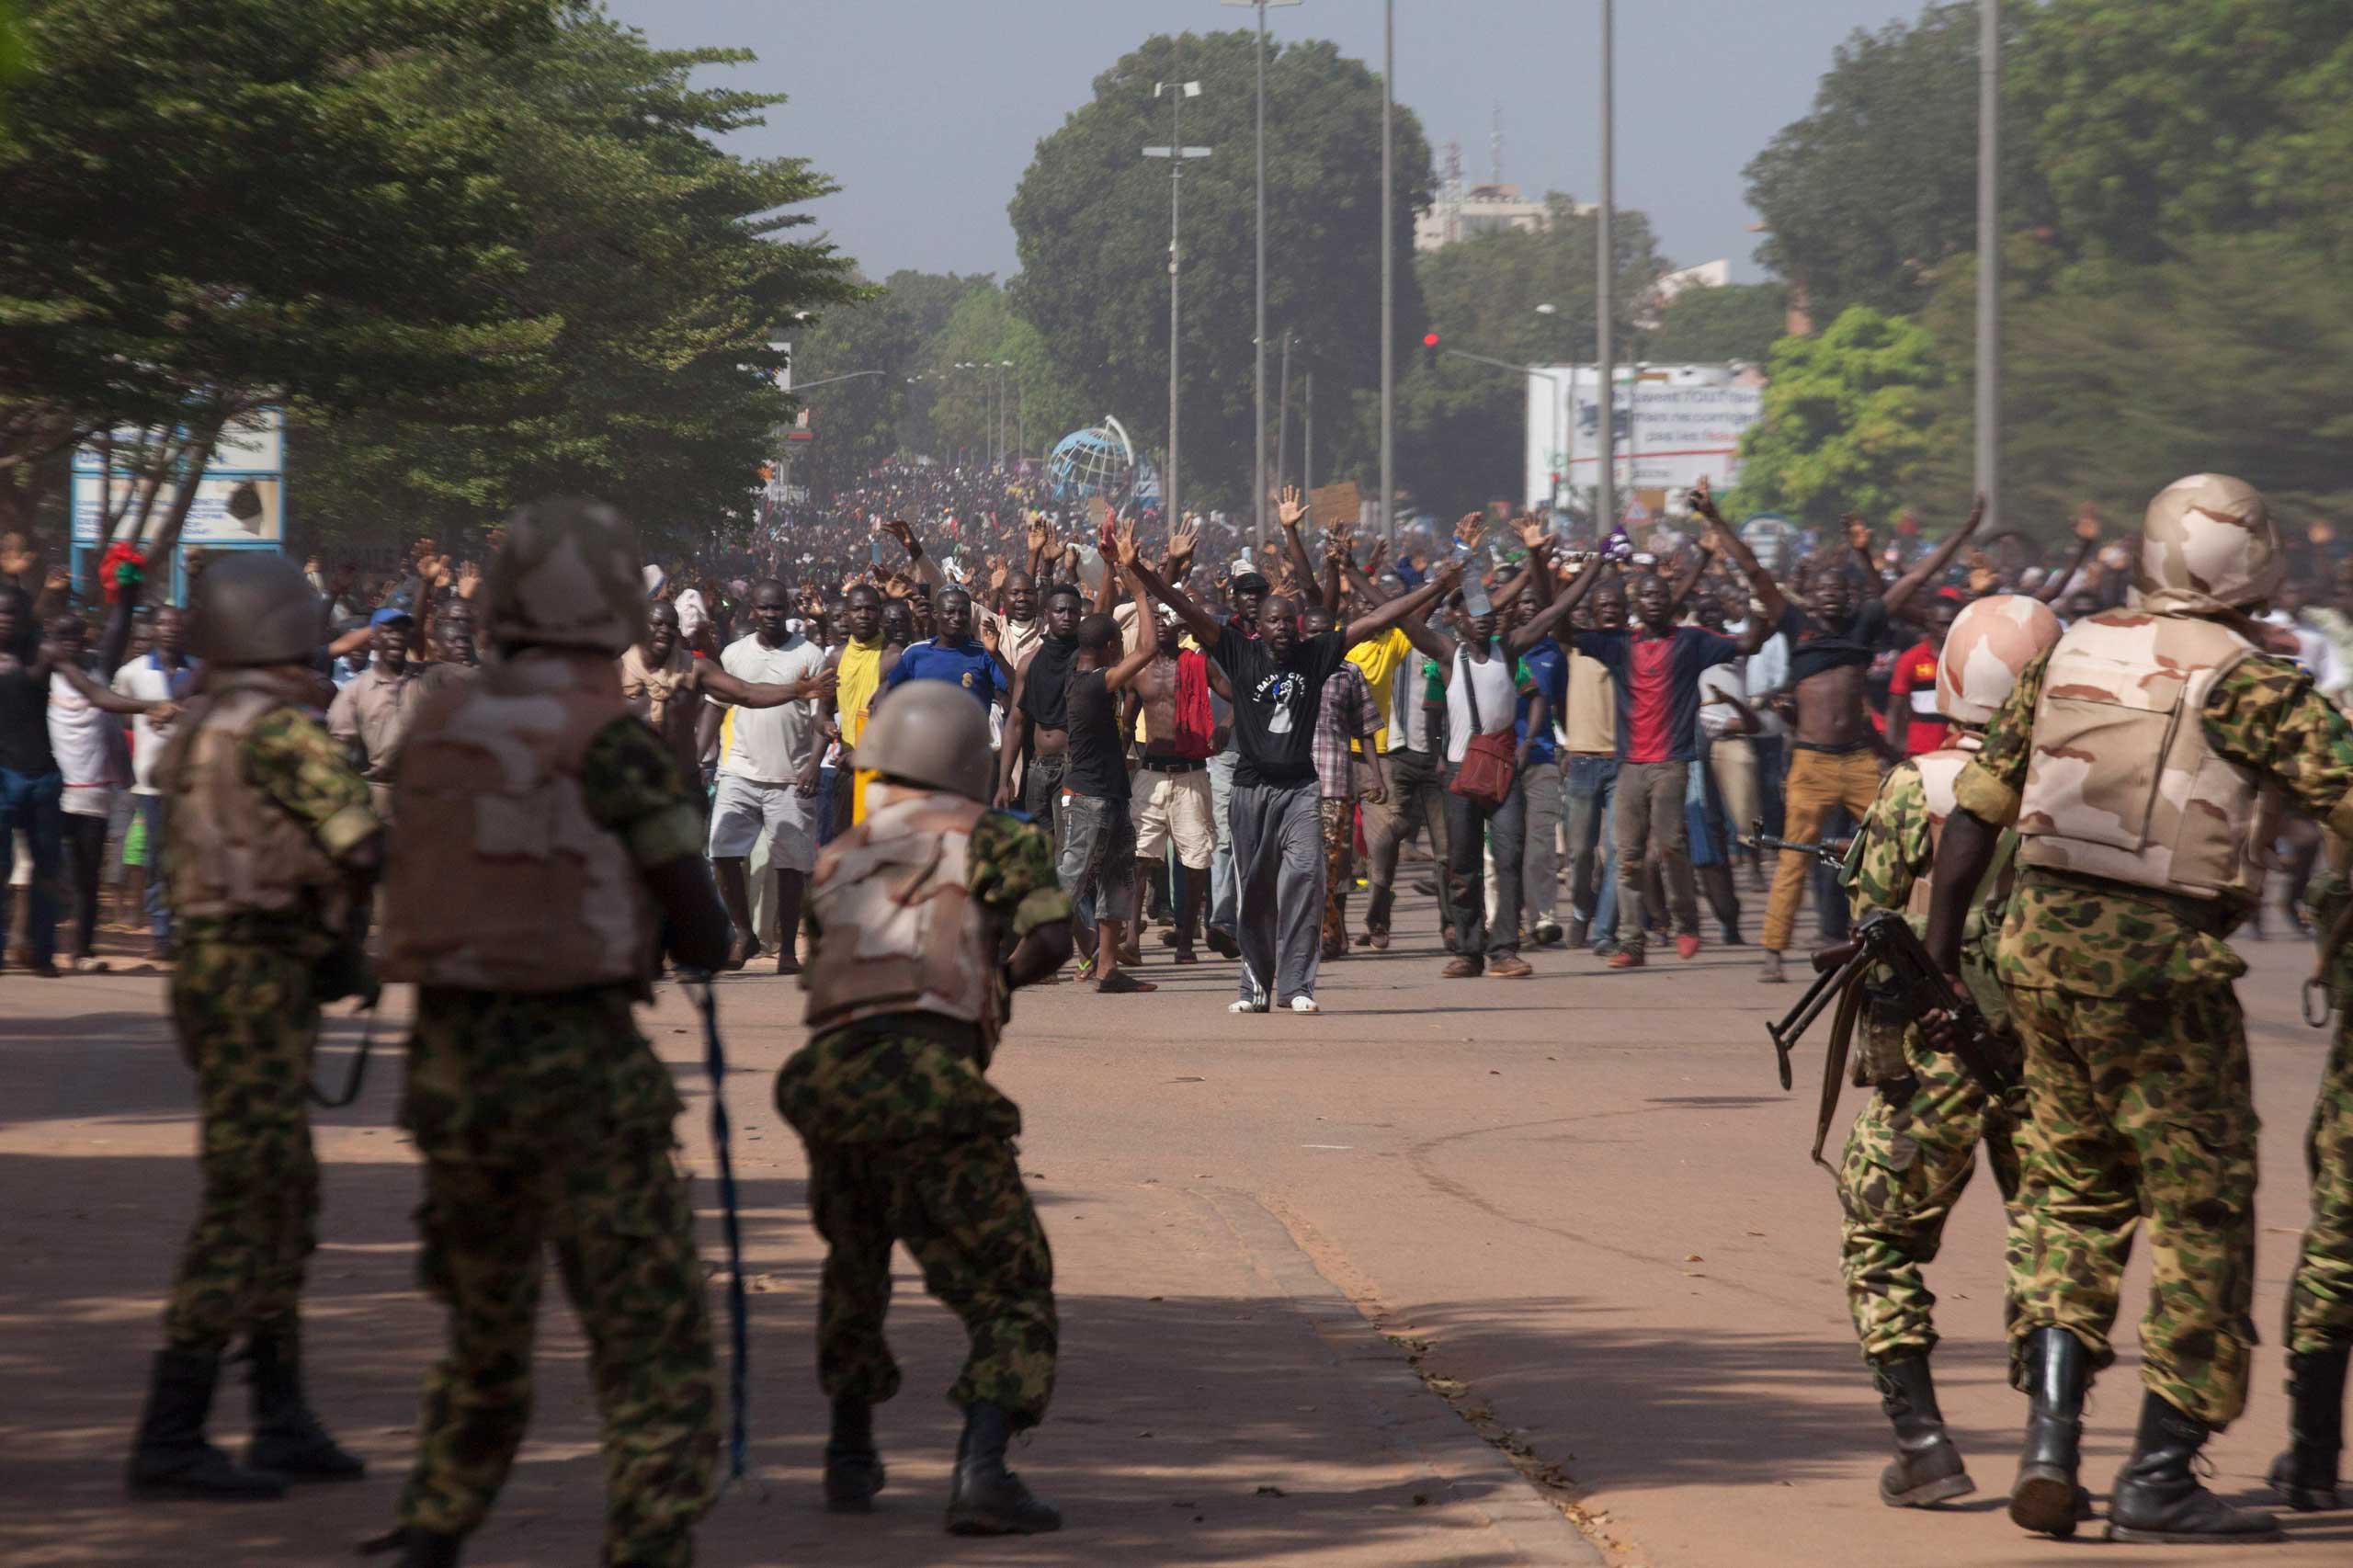 Soldiers attempt to stop anti-government protesters from entering the parliament building in Ouagadougou, capital of Burkina Faso, Oct. 30, 2014.